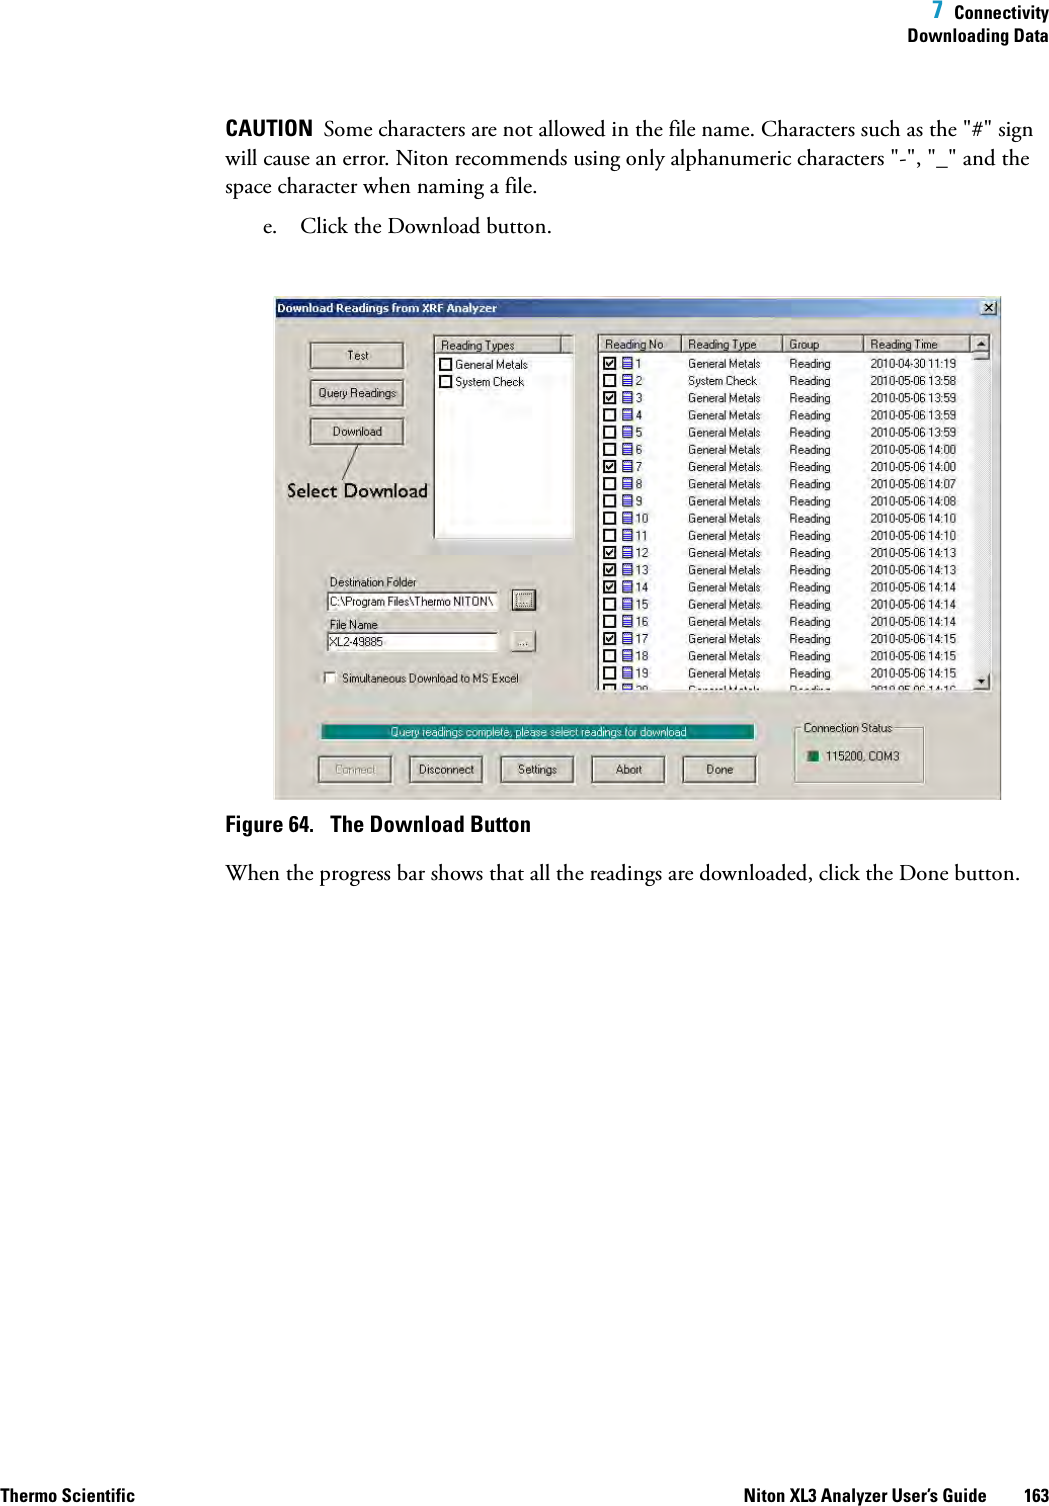  7  ConnectivityDownloading DataThermo Scientific Niton XL3 Analyzer User’s Guide 163CAUTION  Some characters are not allowed in the file name. Characters such as the &quot;#&quot; sign will cause an error. Niton recommends using only alphanumeric characters &quot;-&quot;, &quot;_&quot; and the space character when naming a file.e. Click the Download button.Figure 64.  The Download ButtonWhen the progress bar shows that all the readings are downloaded, click the Done button.